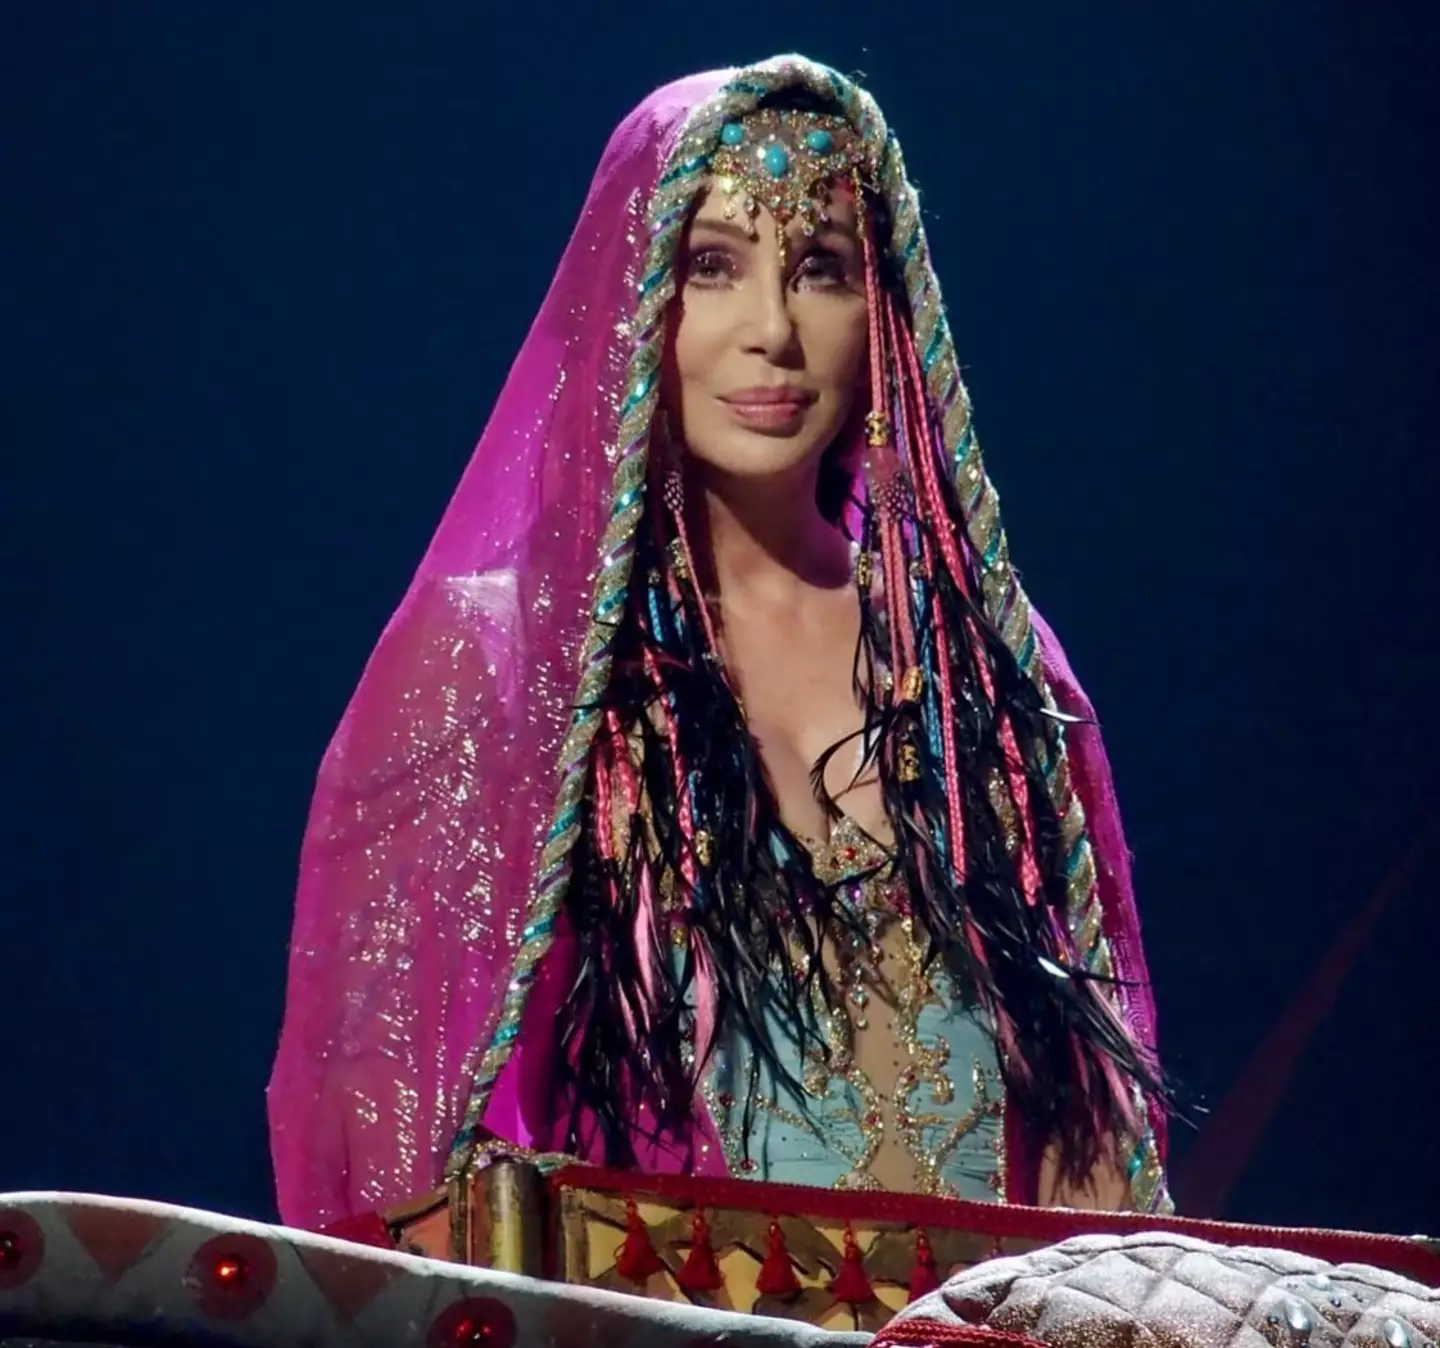 Cher does not look like a woman who is well into her 70s.